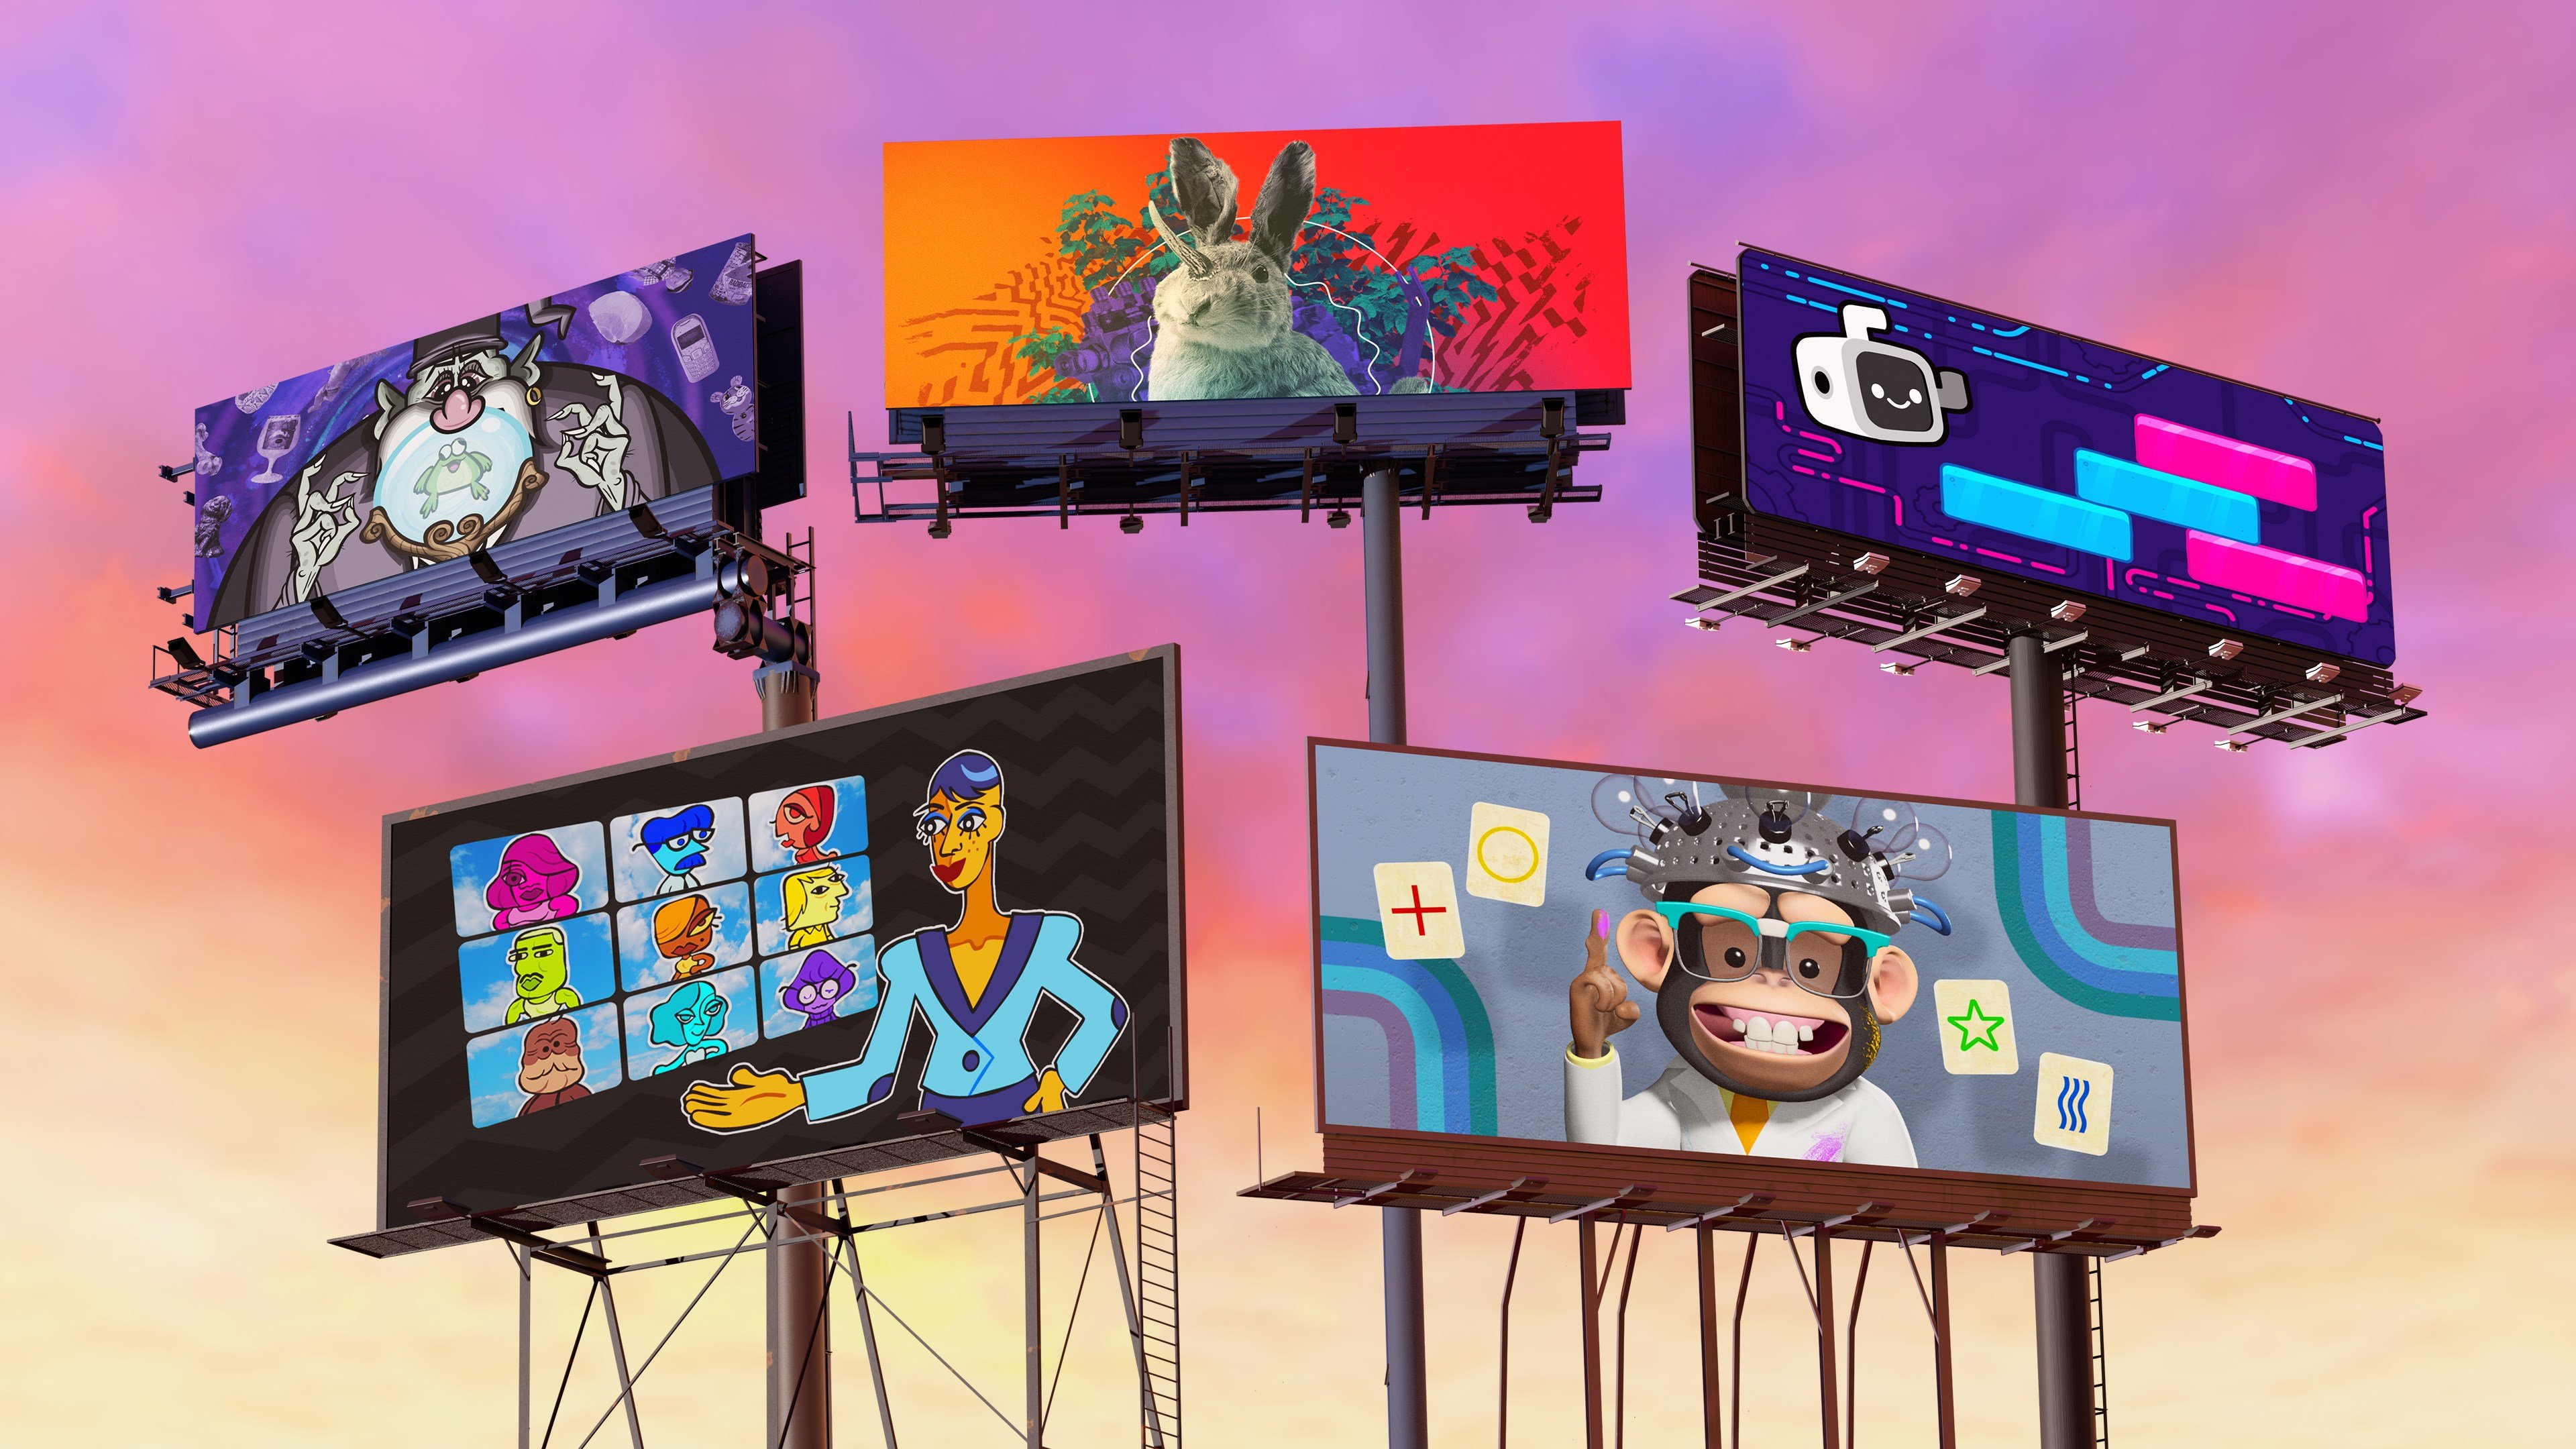 The Jackbox Party Pack 9 cover image